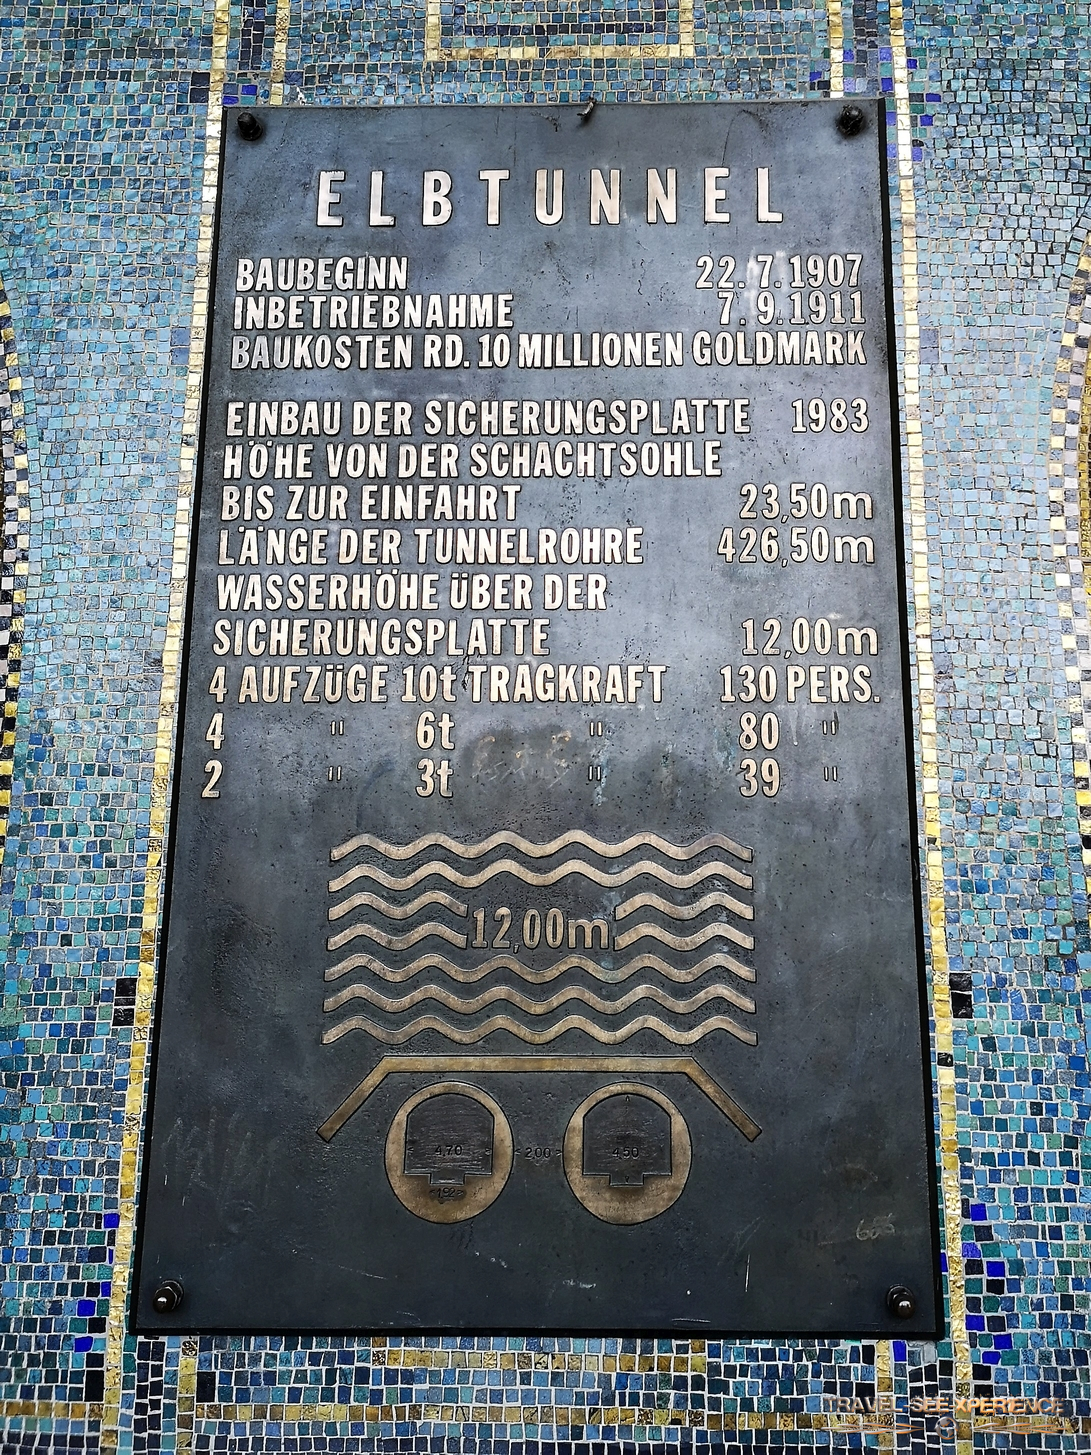 Information board about the Old Elbe Tunnel Hamburg